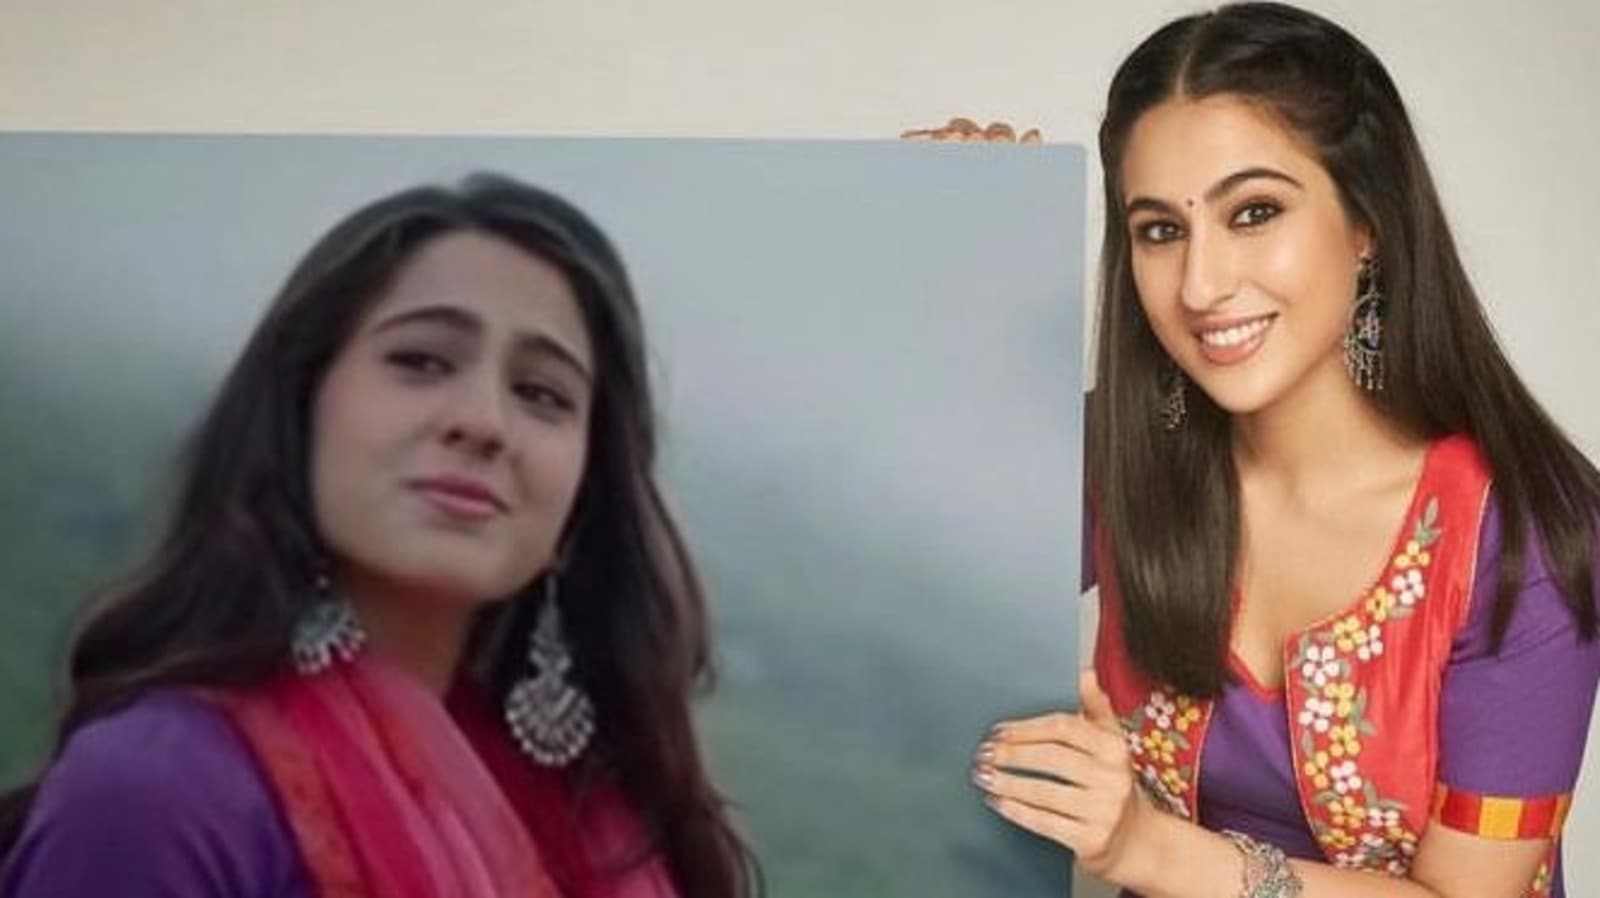 Sara Ali Khan revisits her looks from Kedarnath, says ‘repeating is the closest to reliving’